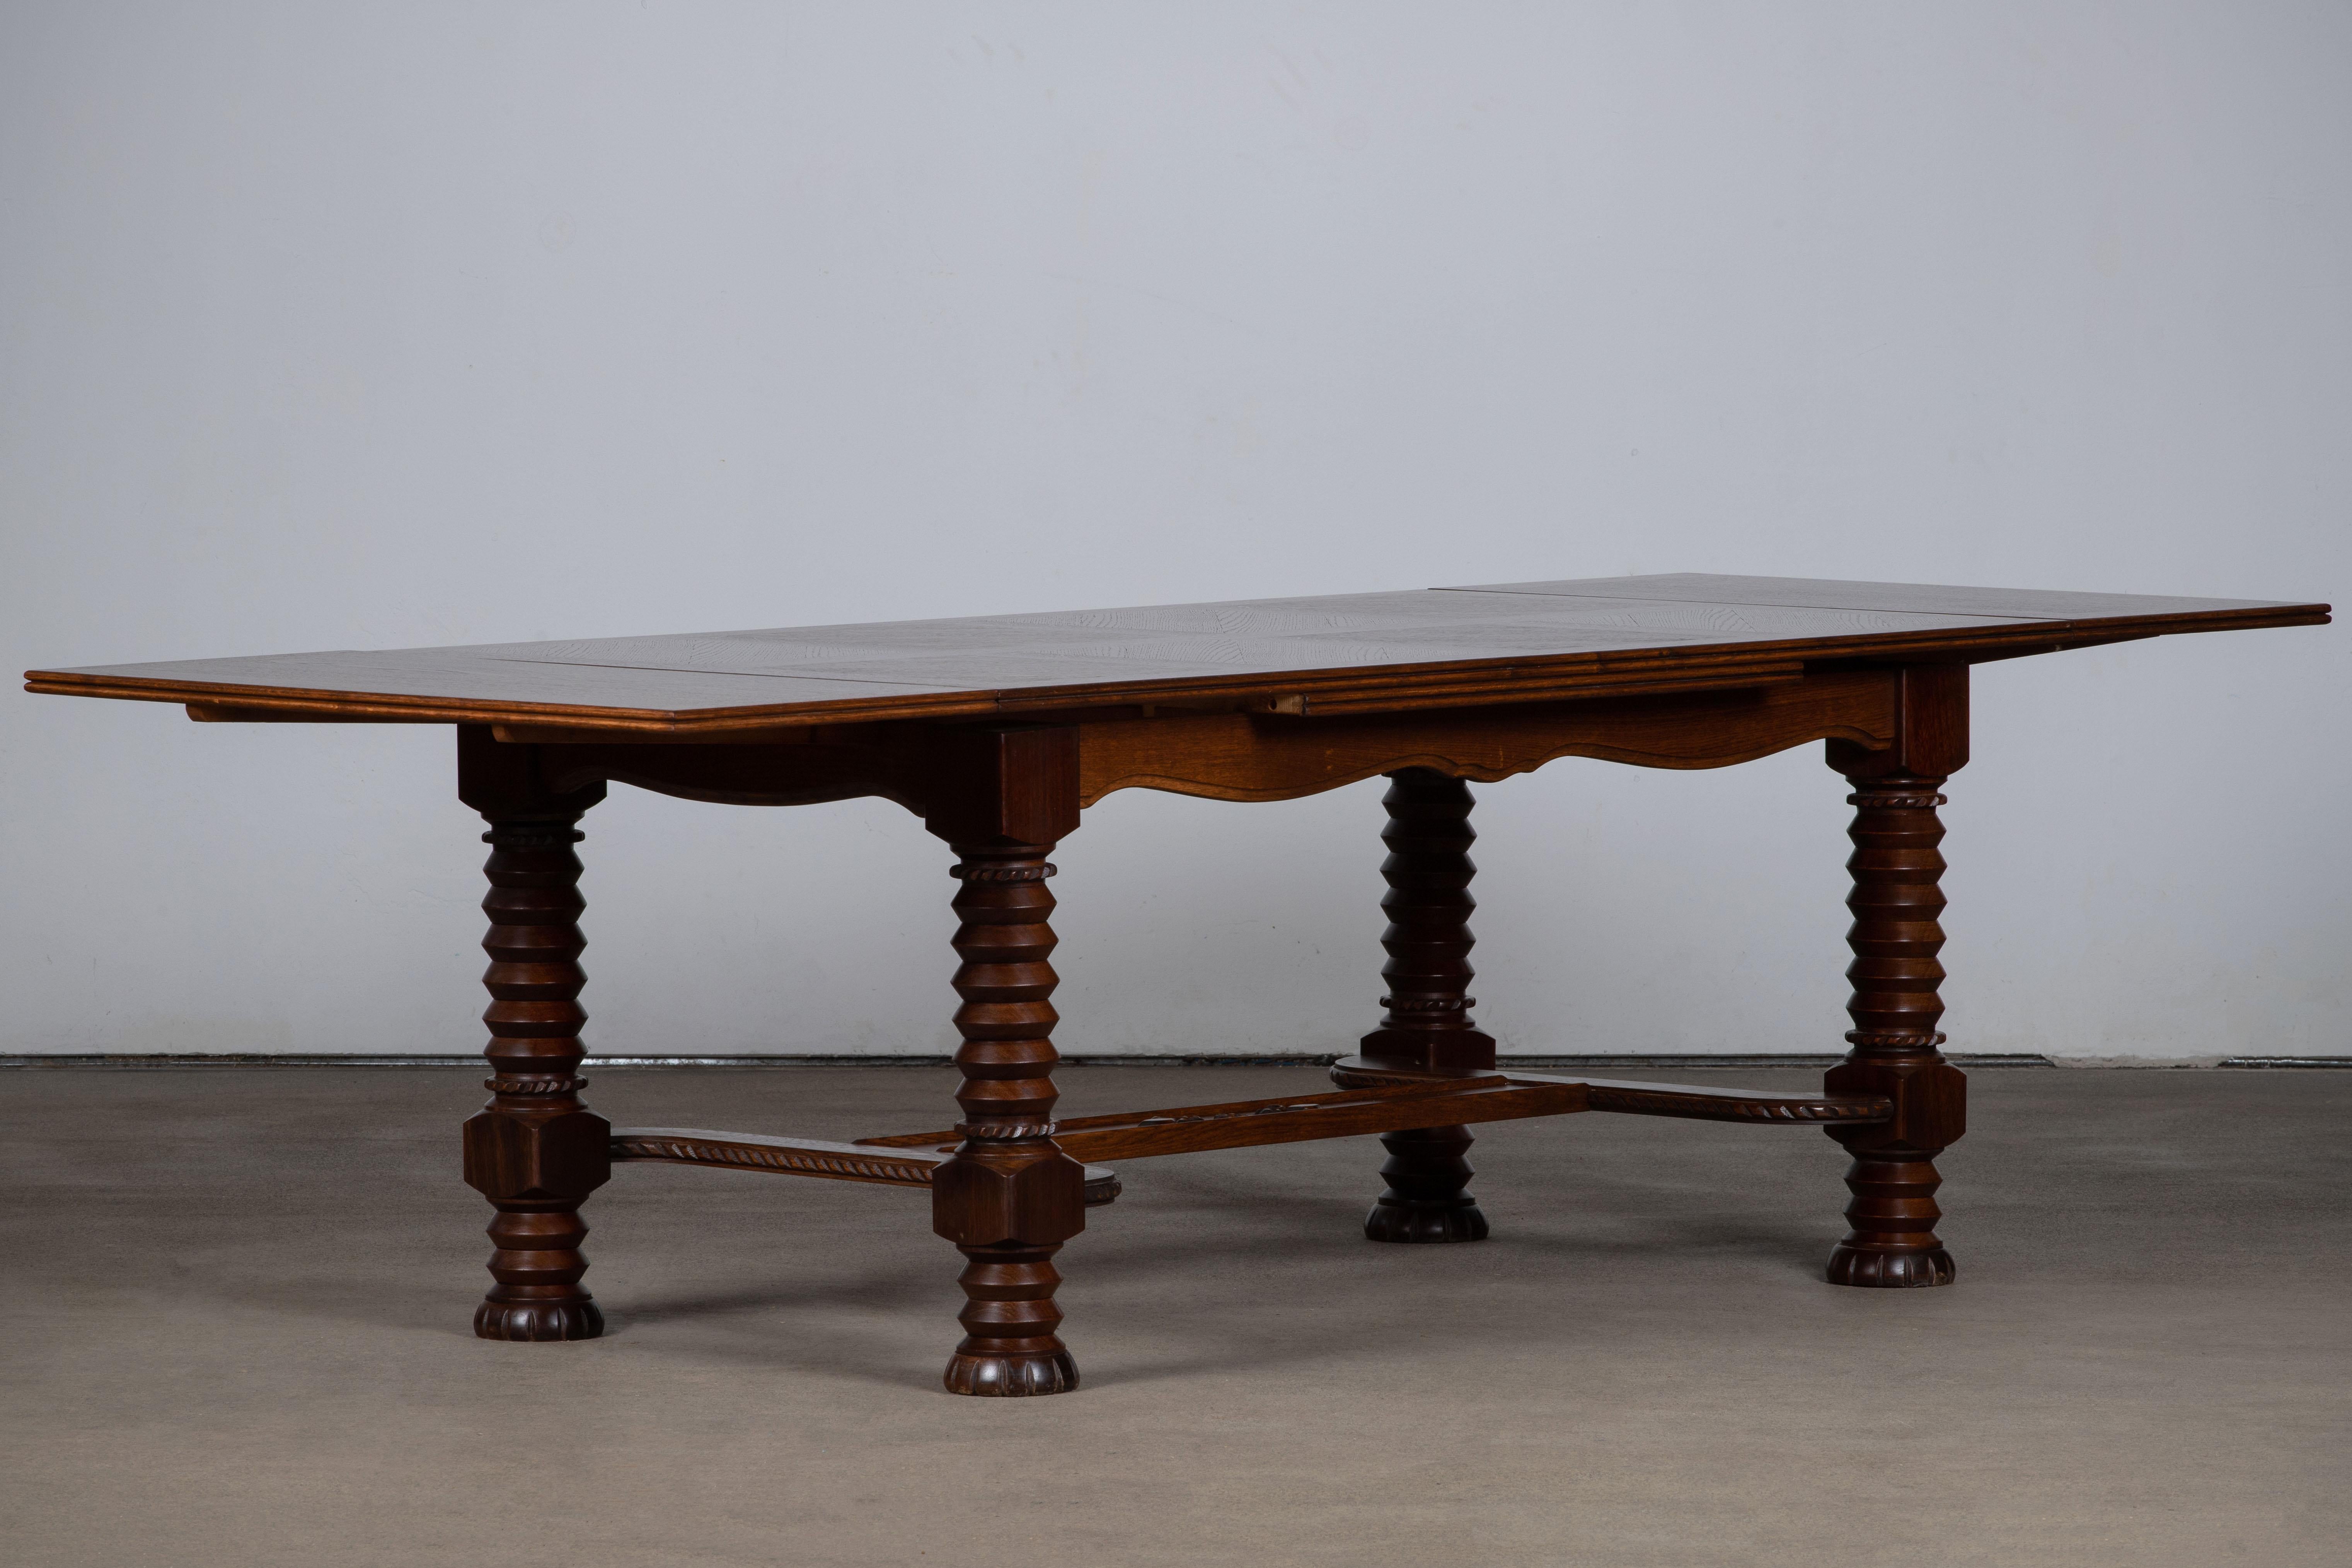 French Art Deco dining table in mahogany, 1960s, France.
The table is in excellent original condition, with minor wear consistent with age and use.
A truly incredible piece in style of Charles Dudouyt.
 